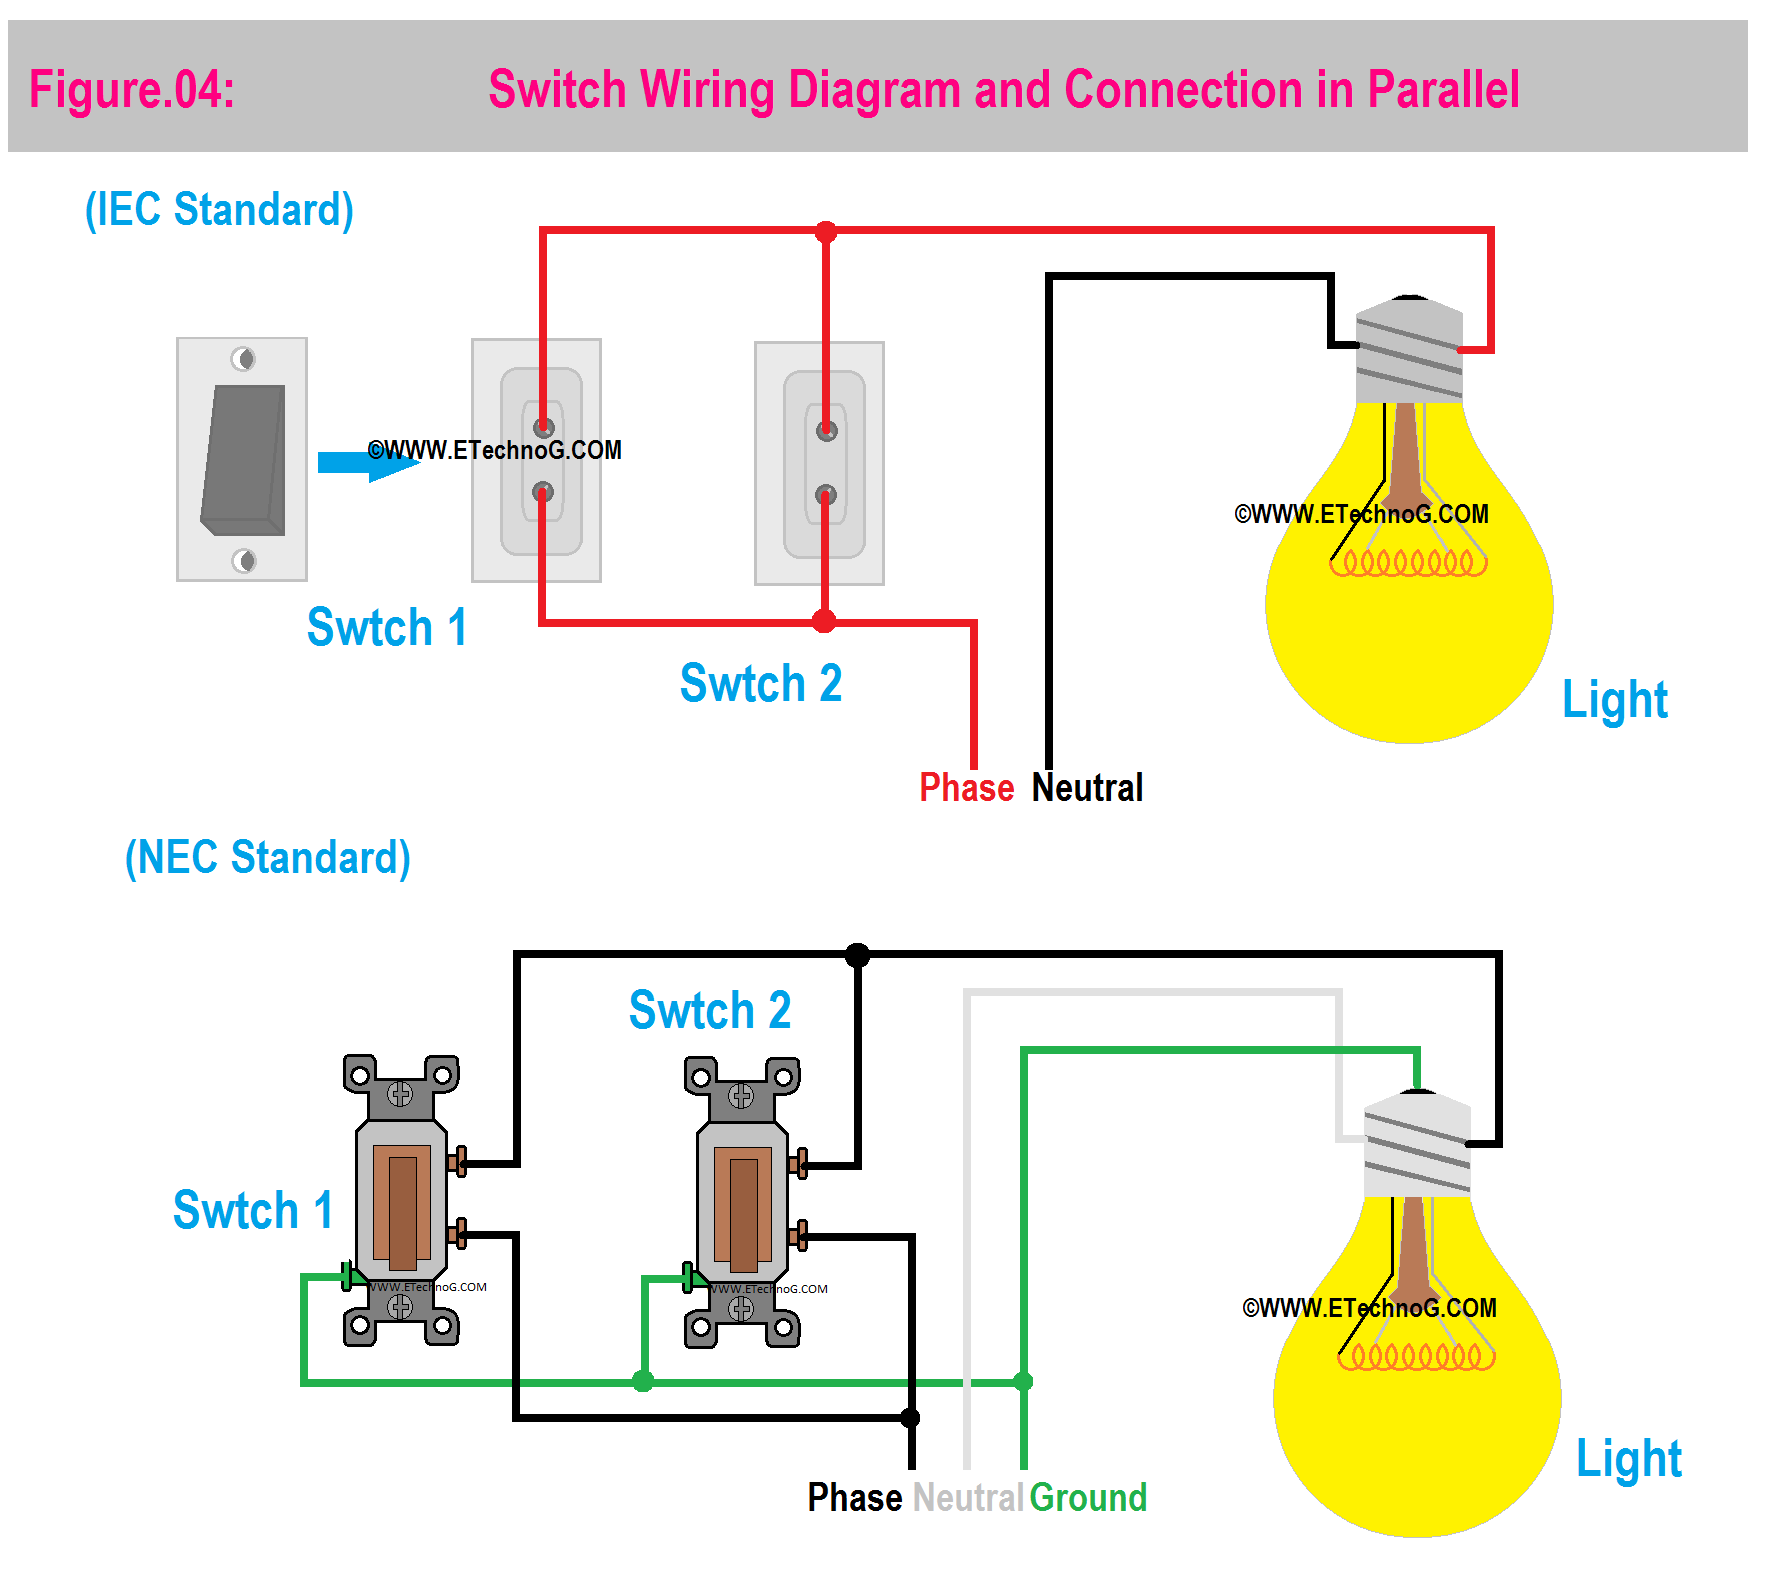 Switch Connection in Parallel